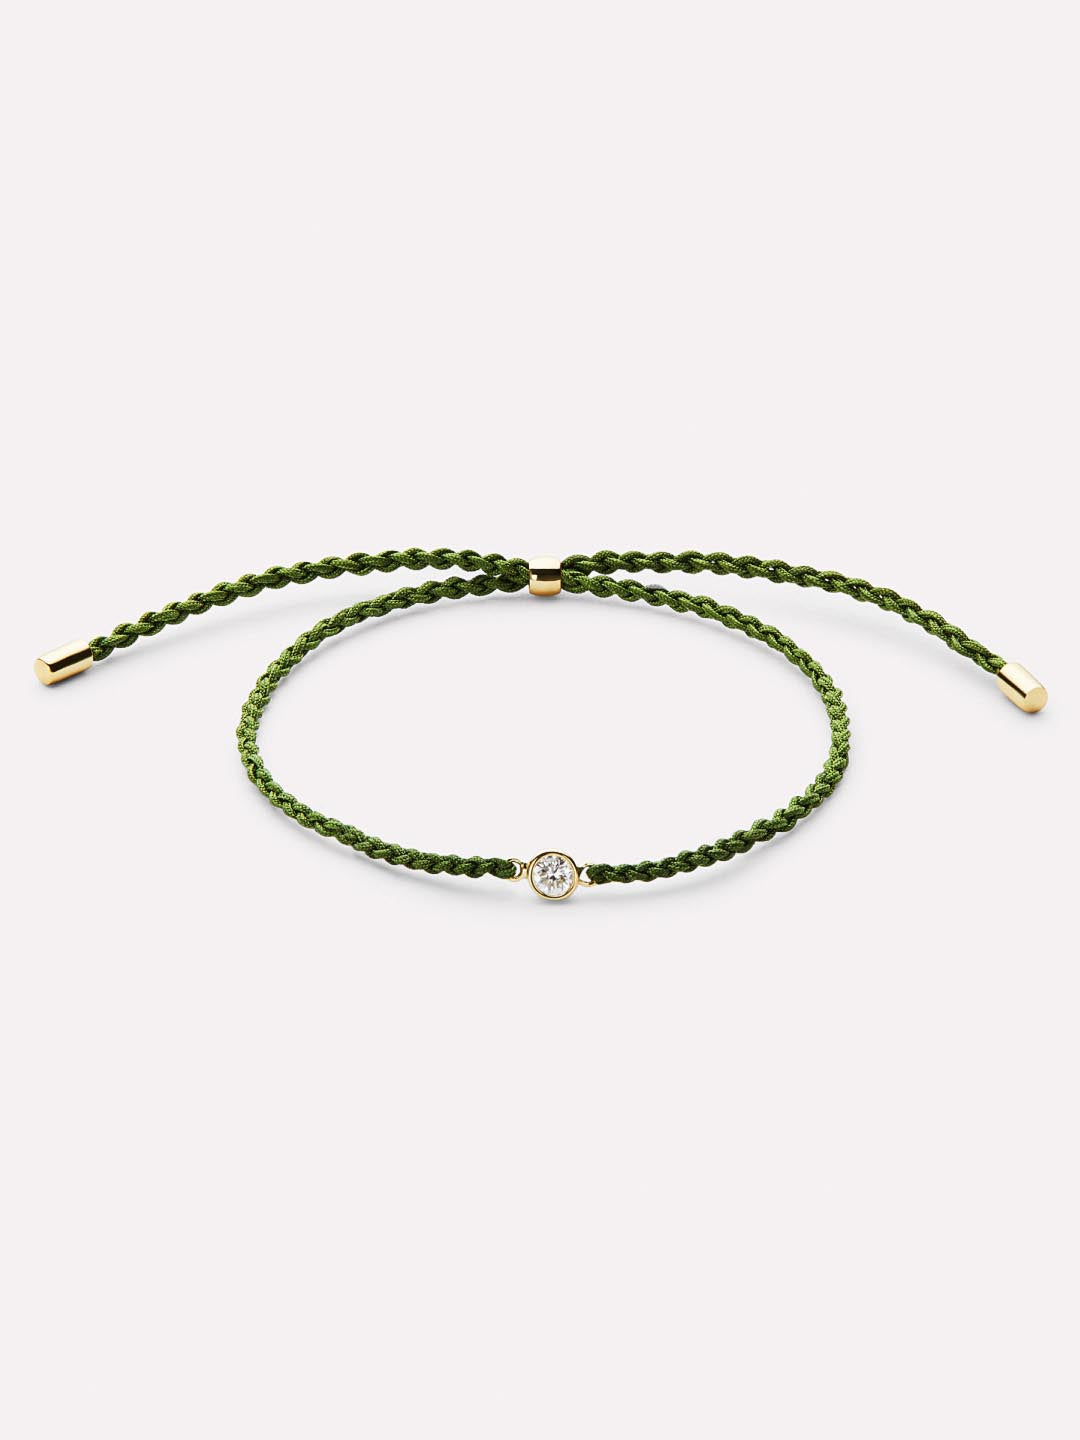 Ana Luisa Gold Chain Bracelet - Harry | CoolSprings Galleria